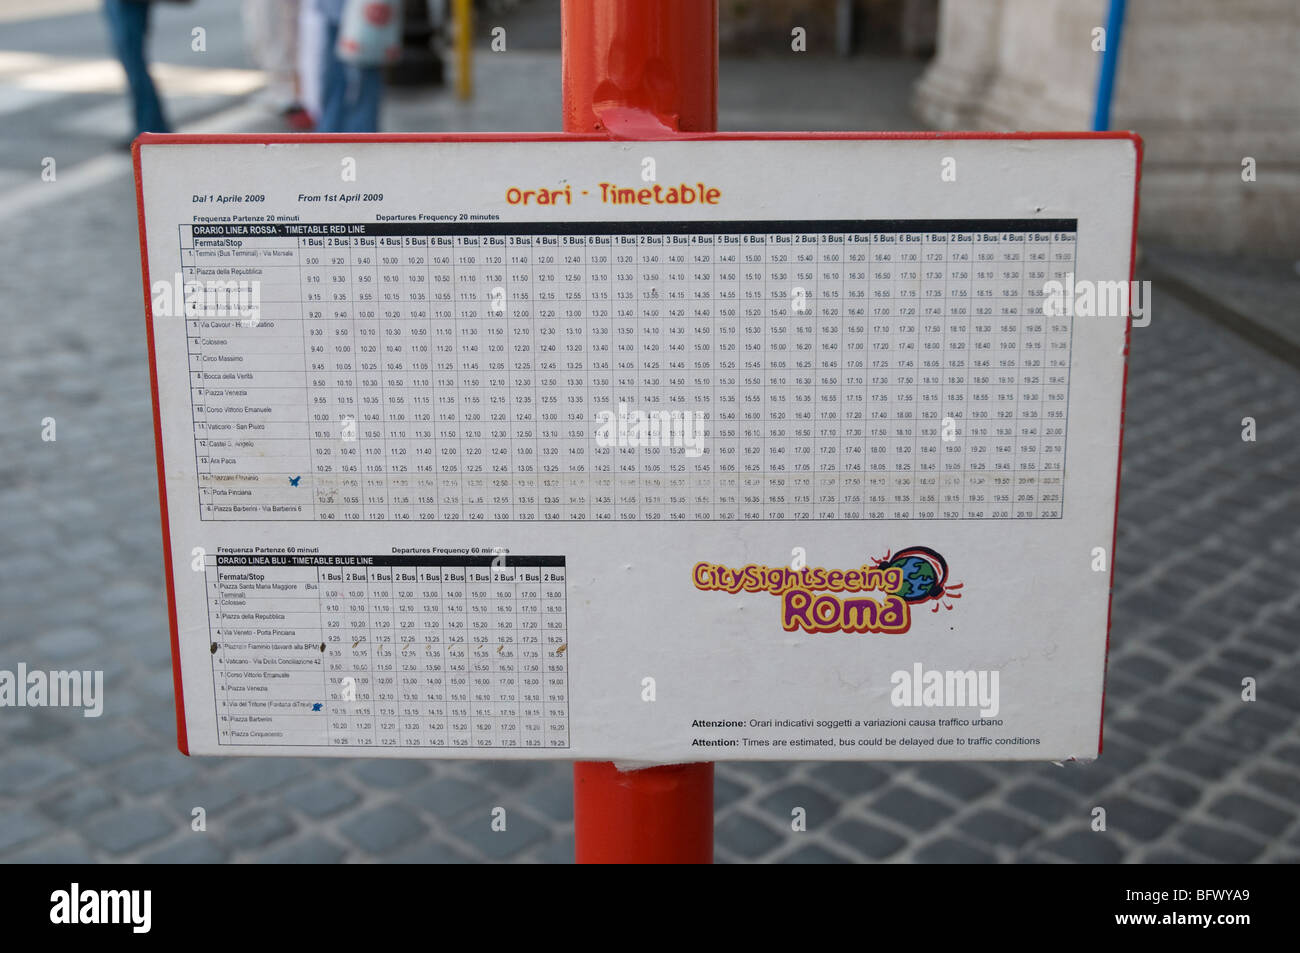 Road sign with timetable of Roman buses. Stock Photo